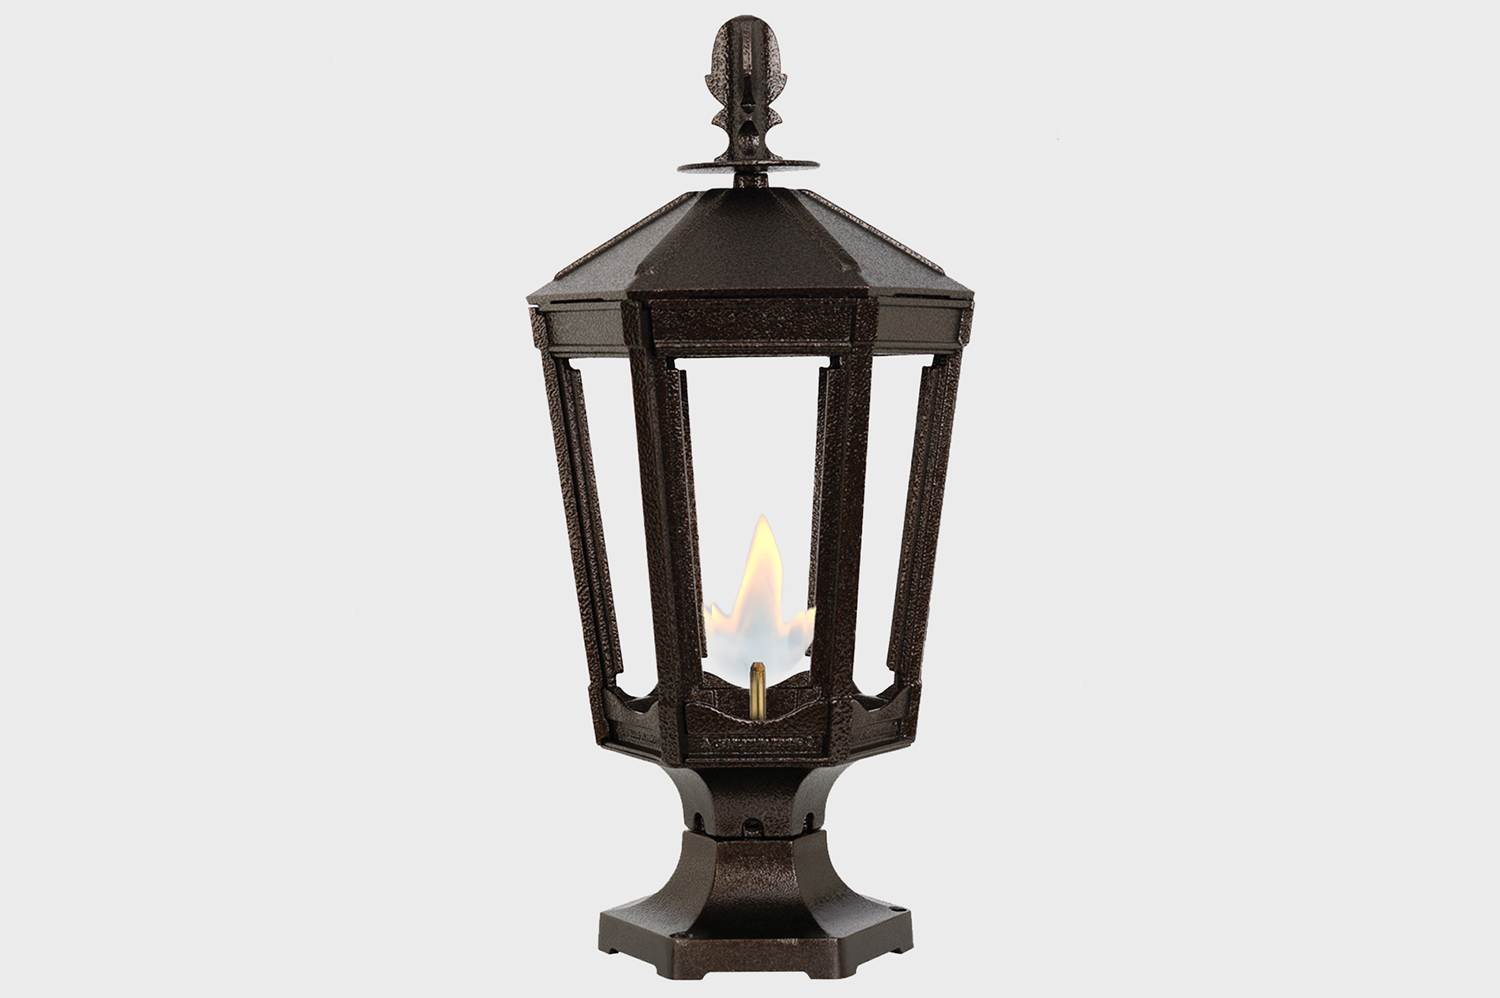 Vienna gas light open flame from american gas lamps